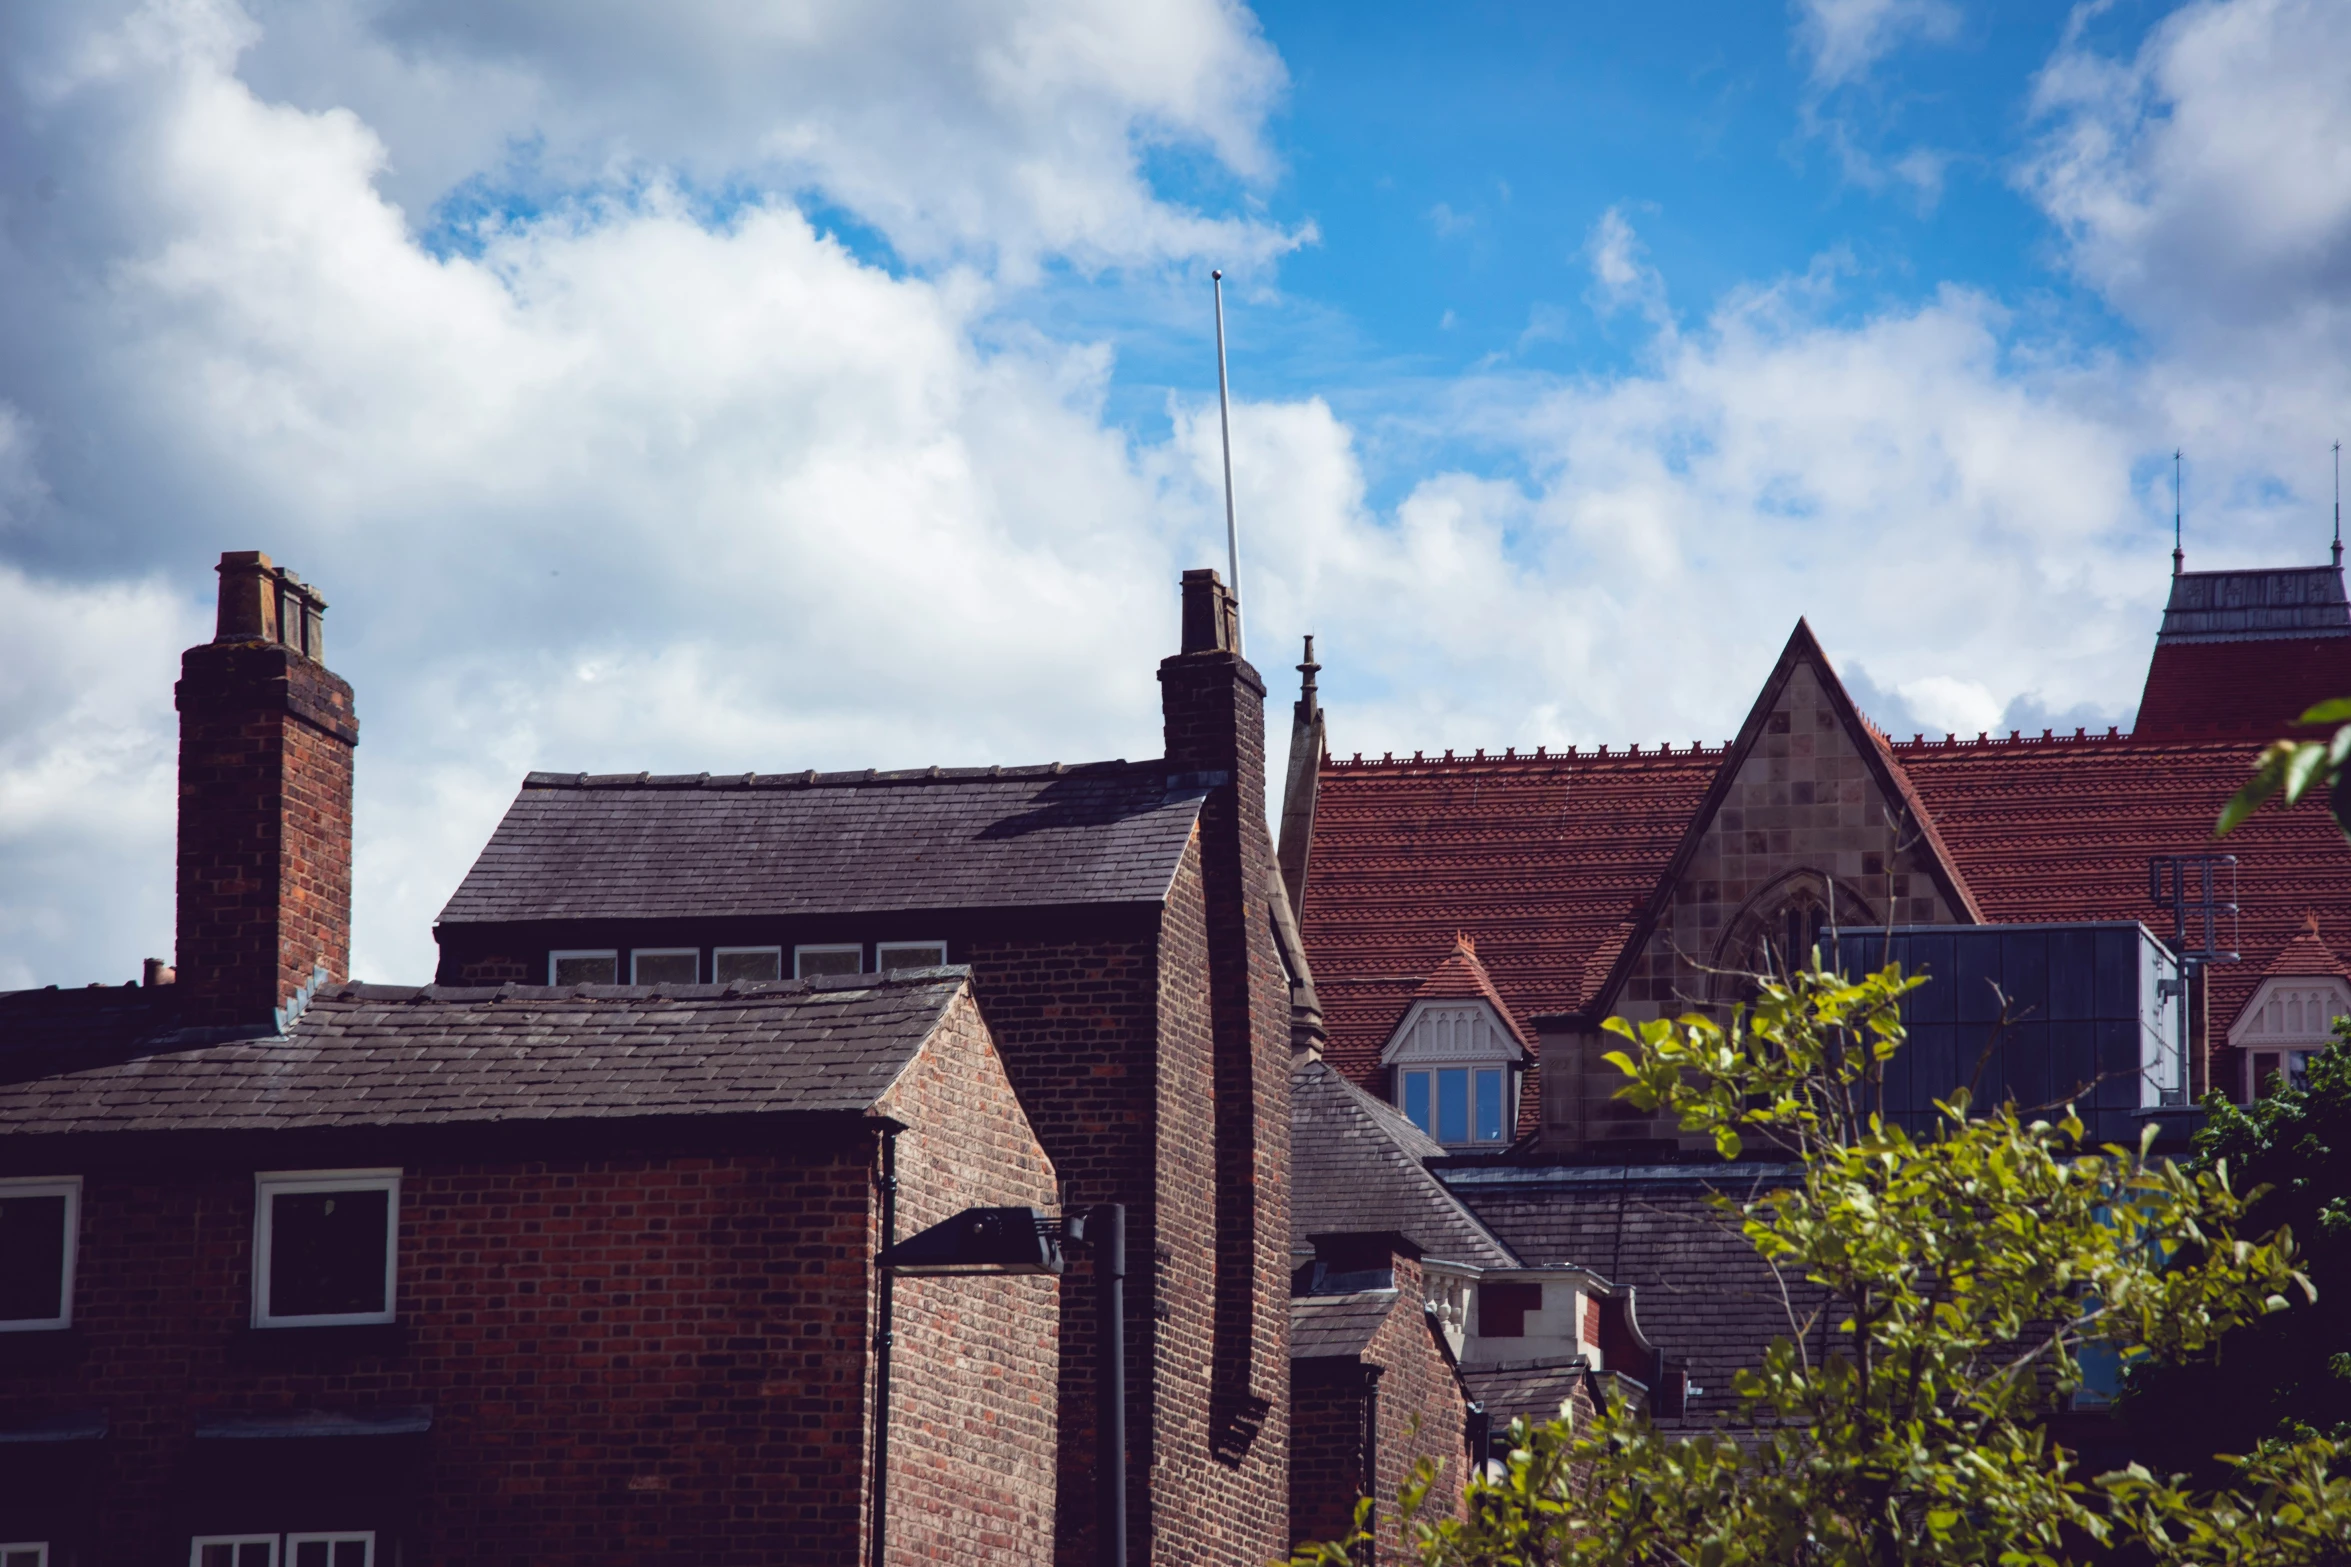 the rooftops and chimneys of two old brick houses